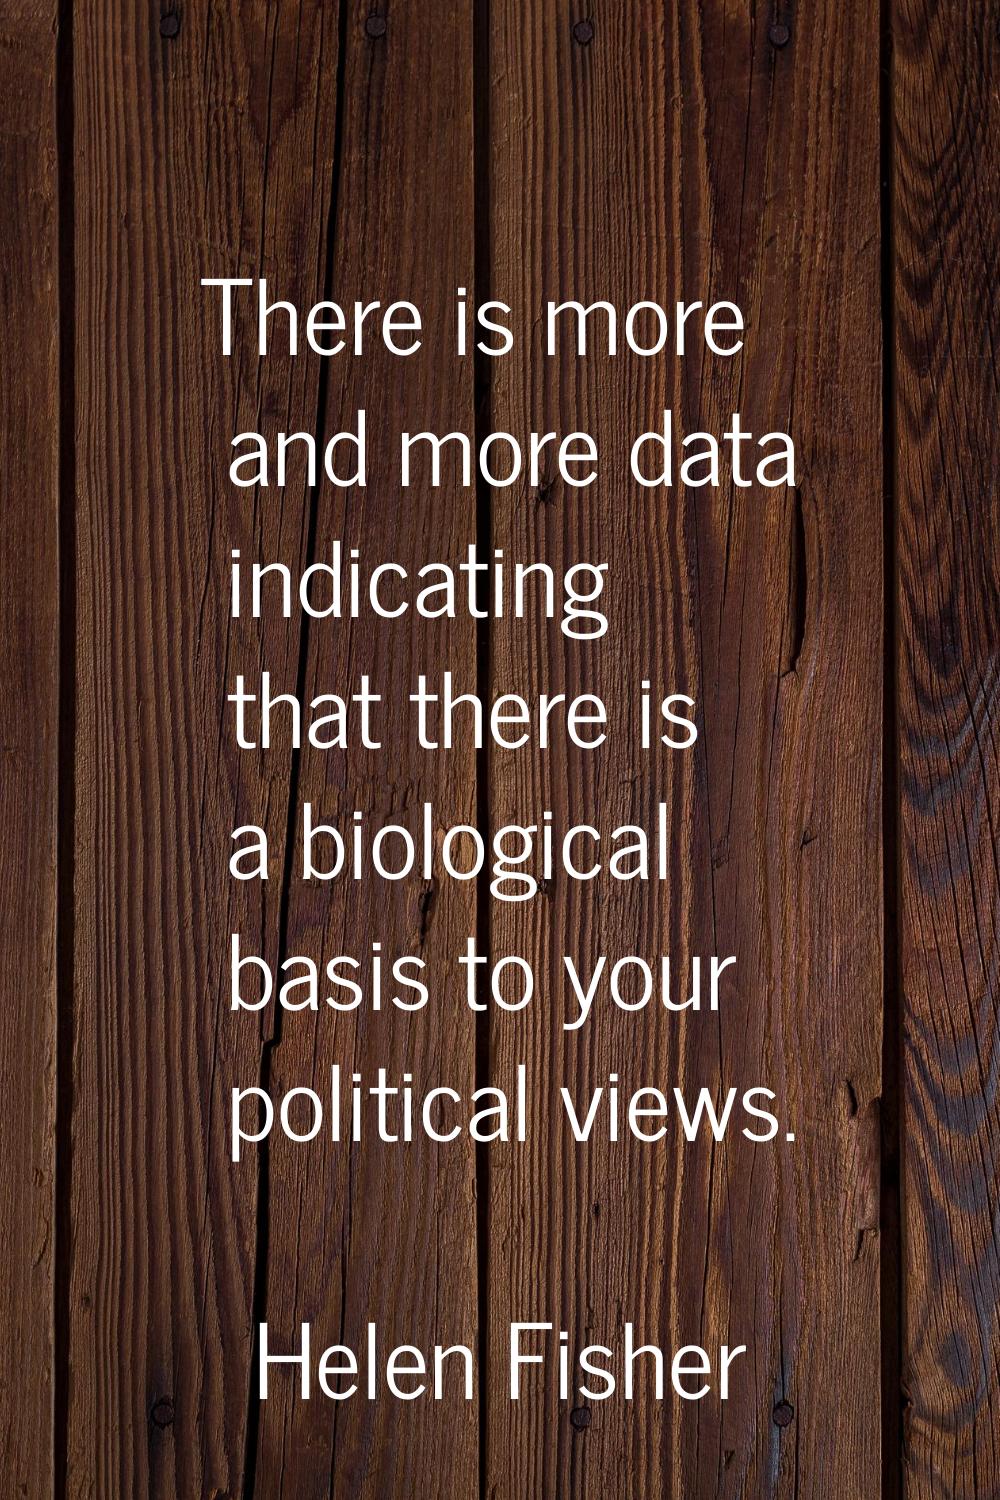 There is more and more data indicating that there is a biological basis to your political views.